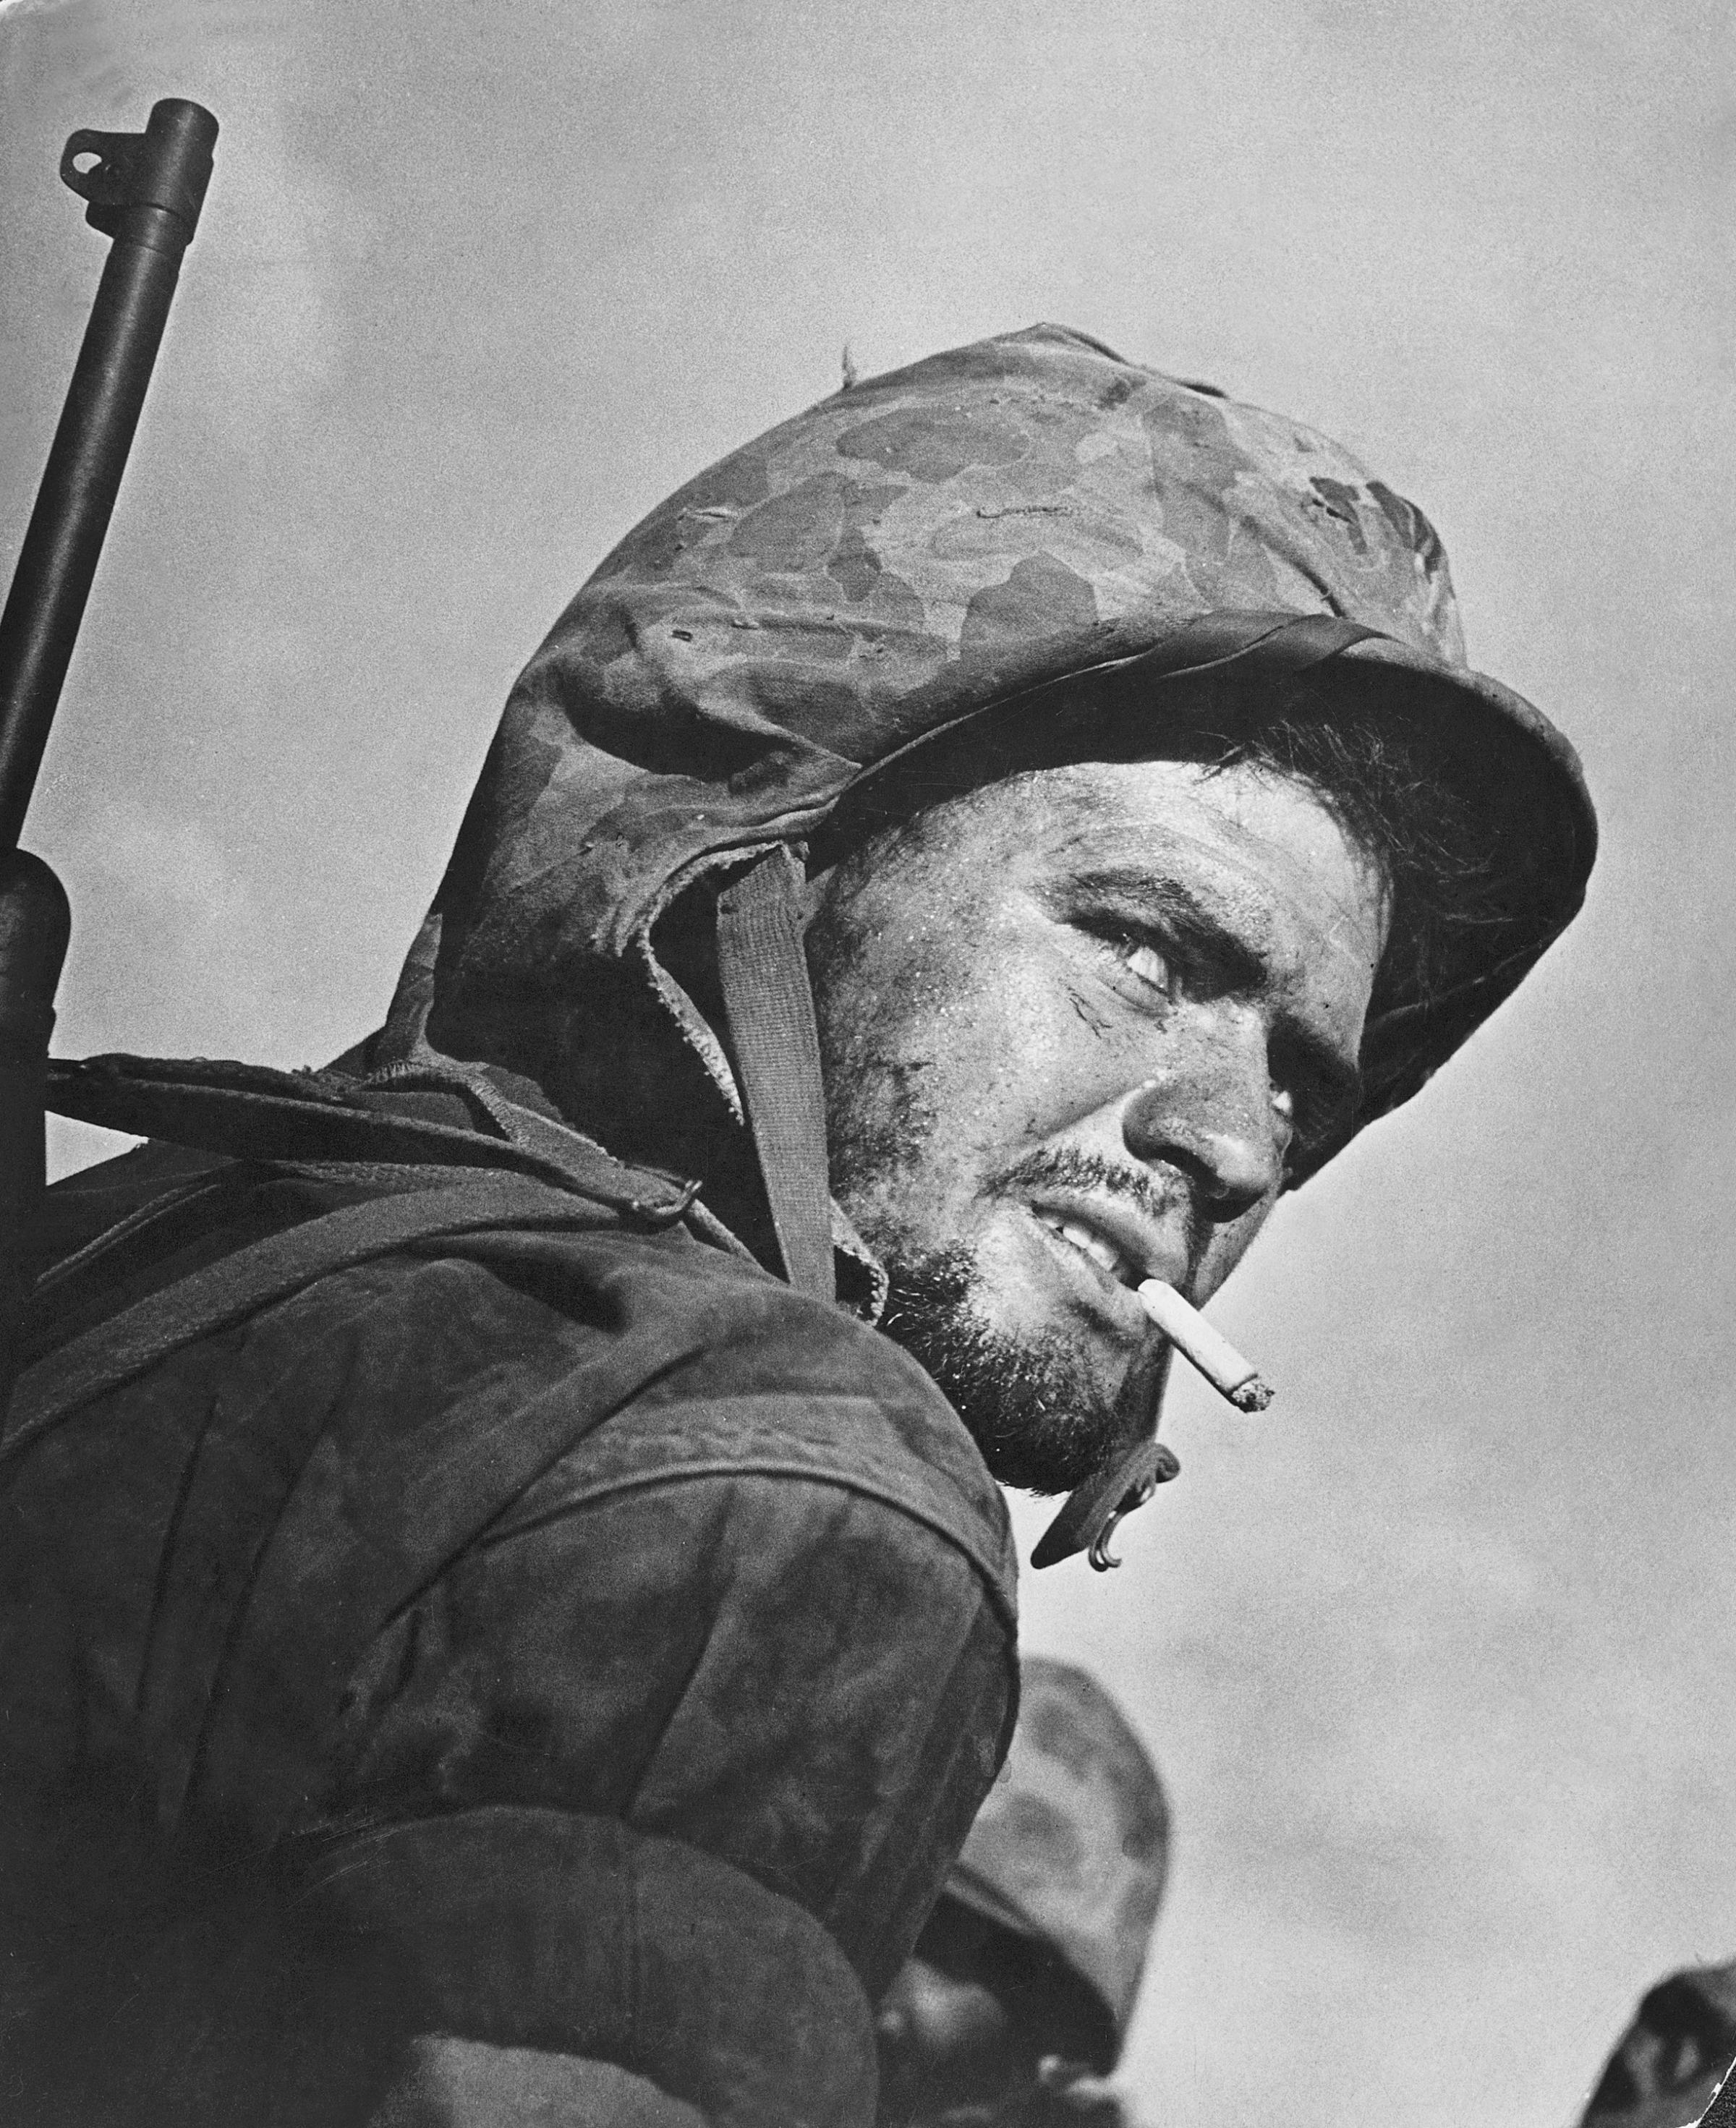 A grizzled, battle-weary Marine peers over his shoulder during the final days of fighting on Saipan, July 1944.